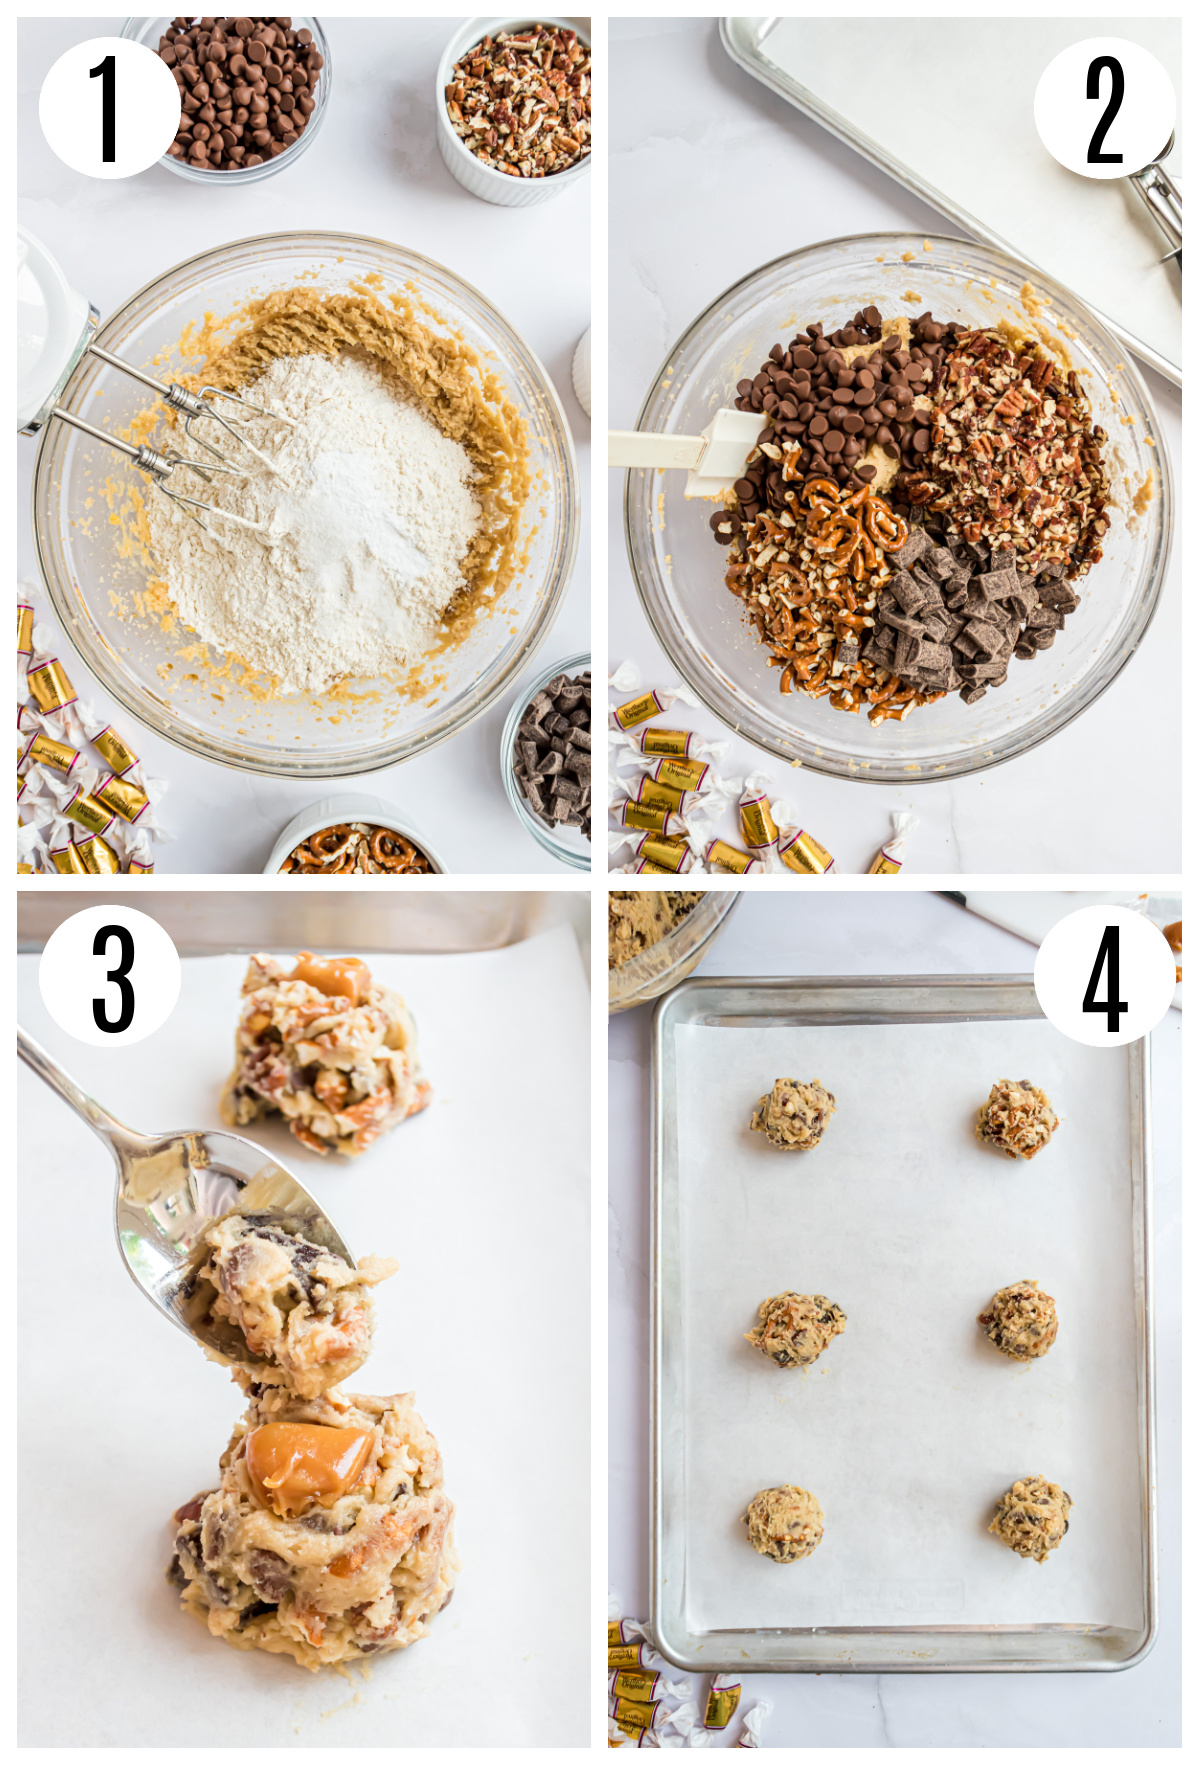 The steps needed to make the kitchen sink cookie dough including mixing the dough, adding the chocolate, pretzels, and nuts, and placing a caramel on top of the cookies before baking.